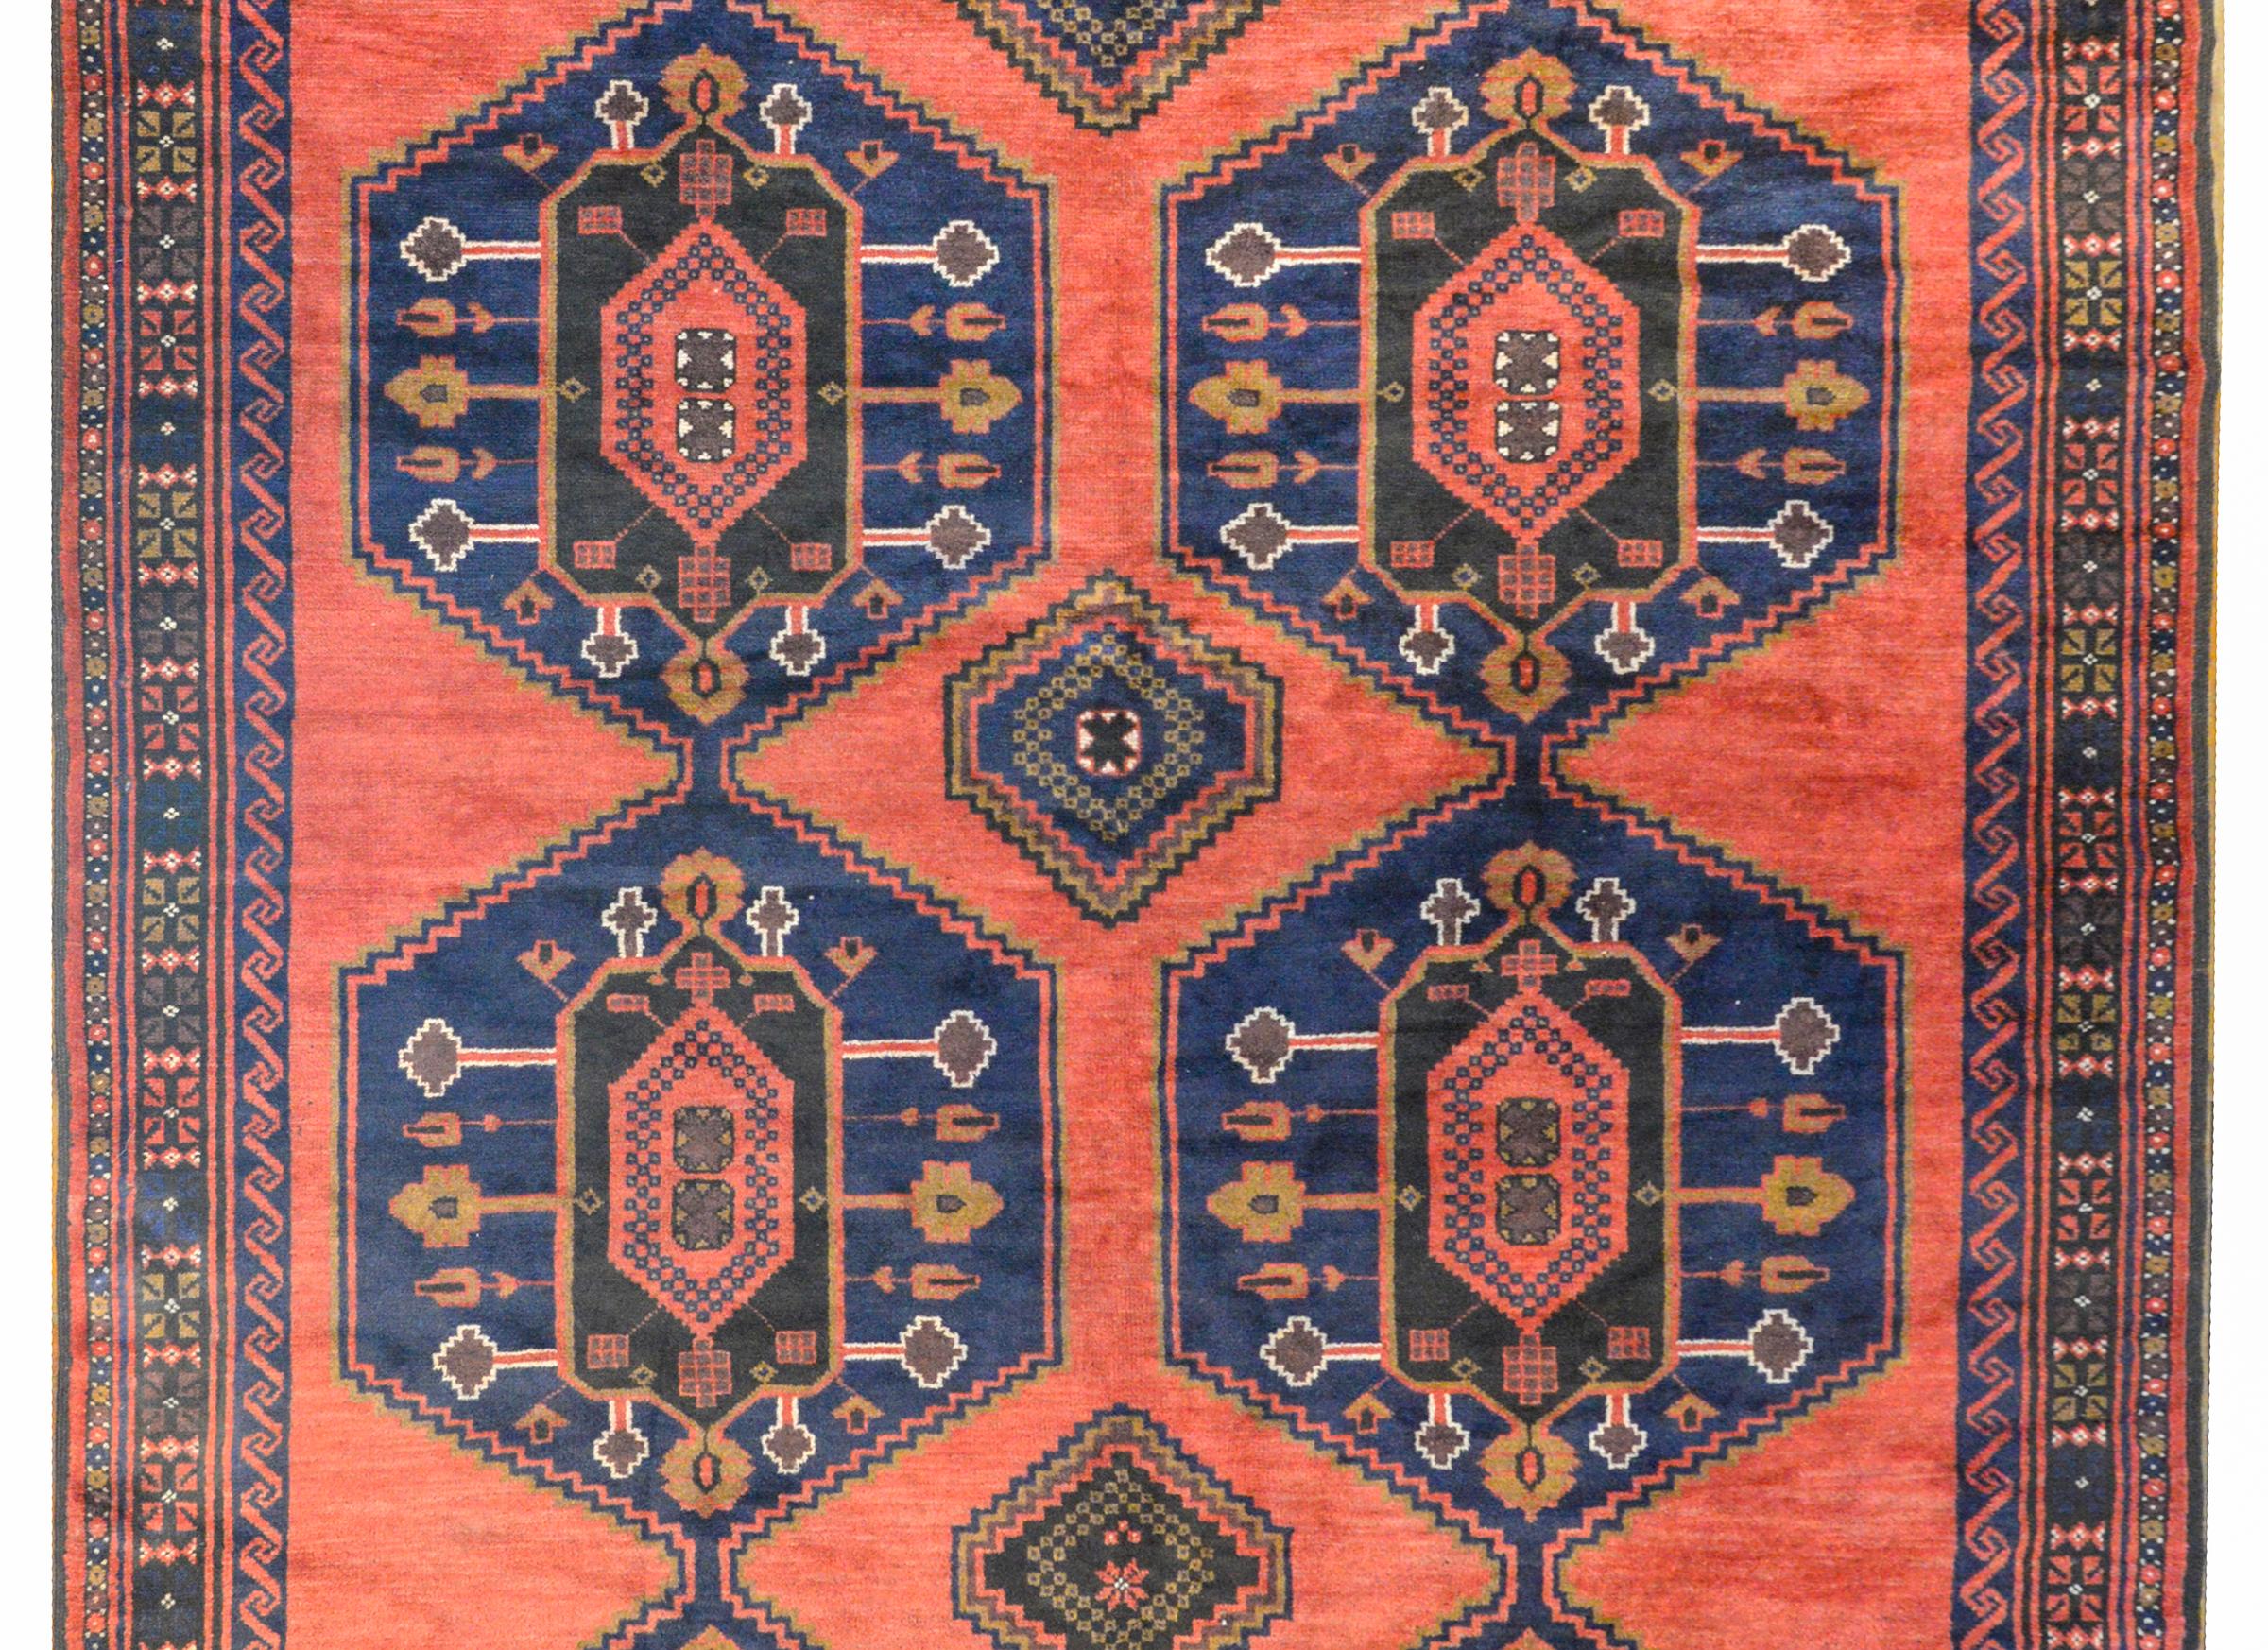 A fabulous vintage Afghani Ersari rug with eight floral and leaf patterned hexagonal medallions woven in crimson, white, brown, and black vegetable dyed wool, all with dark indigo backgrounds against a bold crimson background. The border is